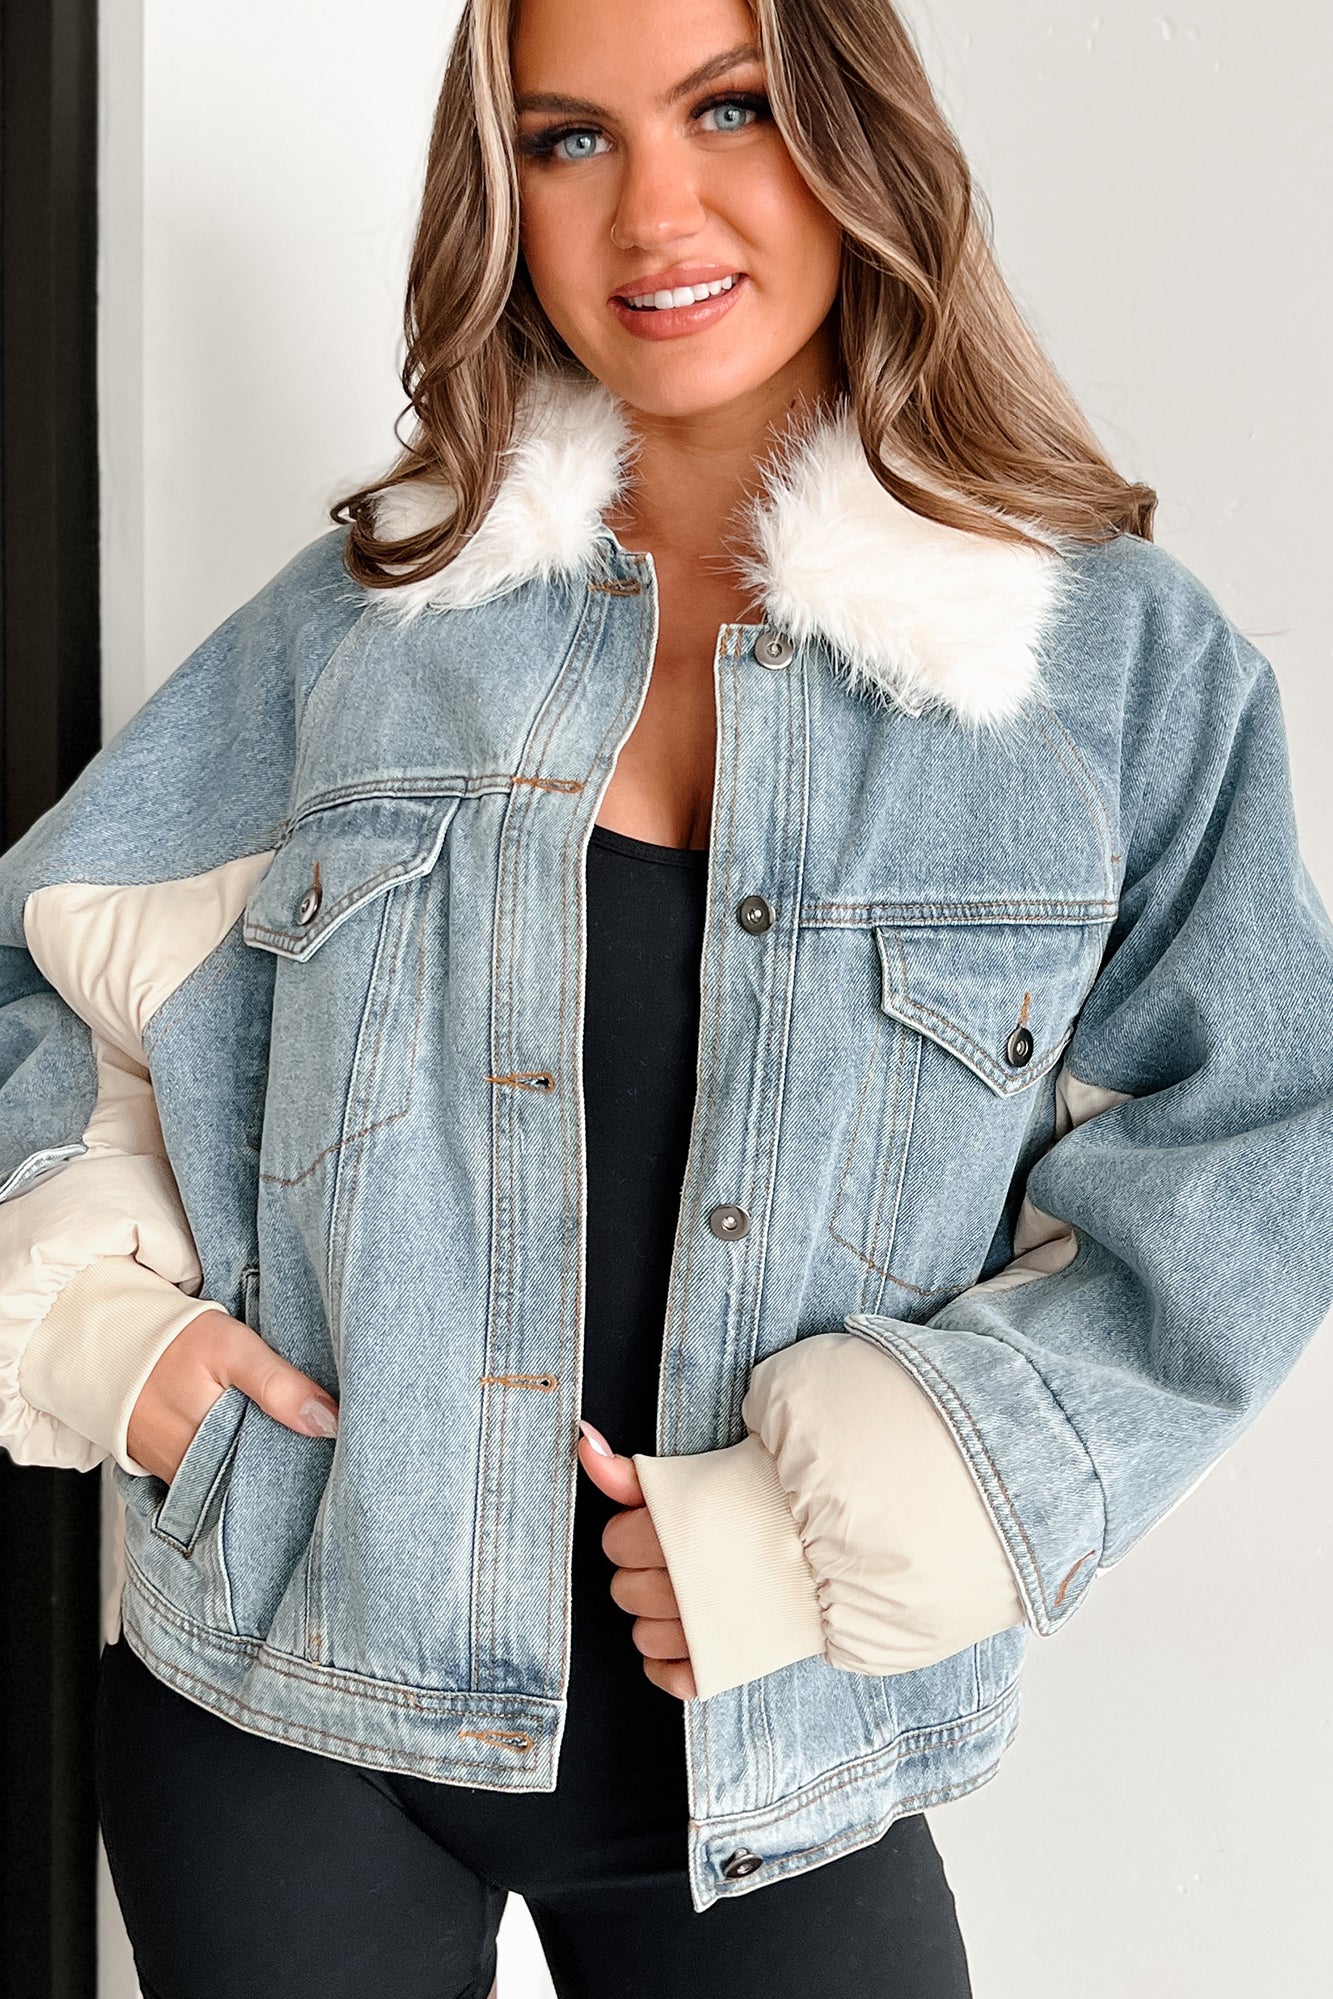 Discover 227+ denim jacket with wool collar best